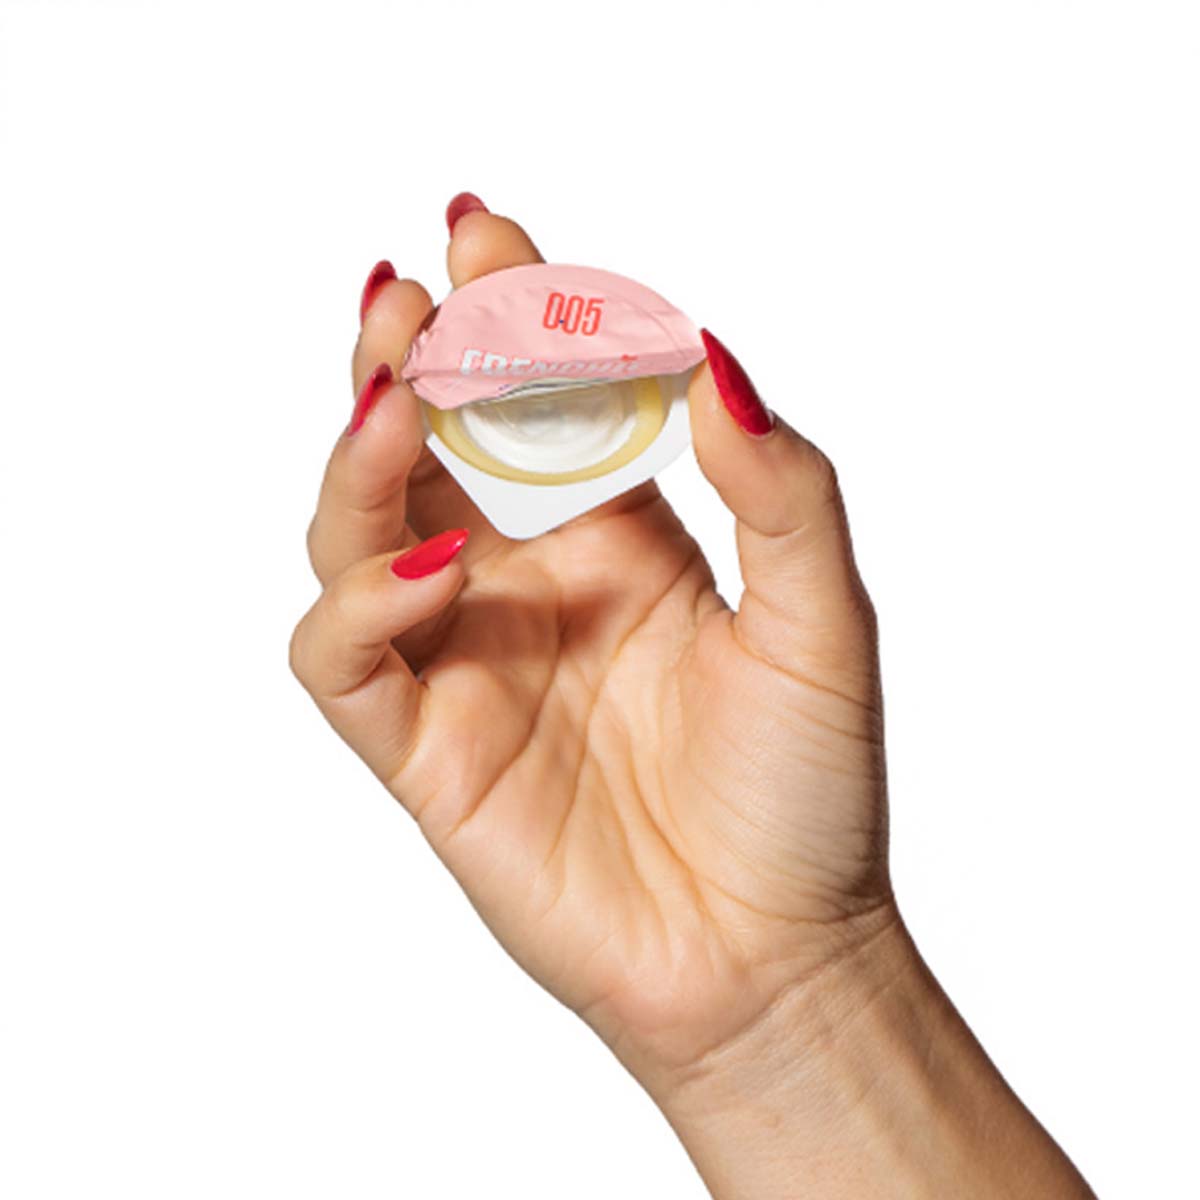 Woman'd hand with red nails, holding a single packaging of a Frenchie Vegan condom Nudie Co